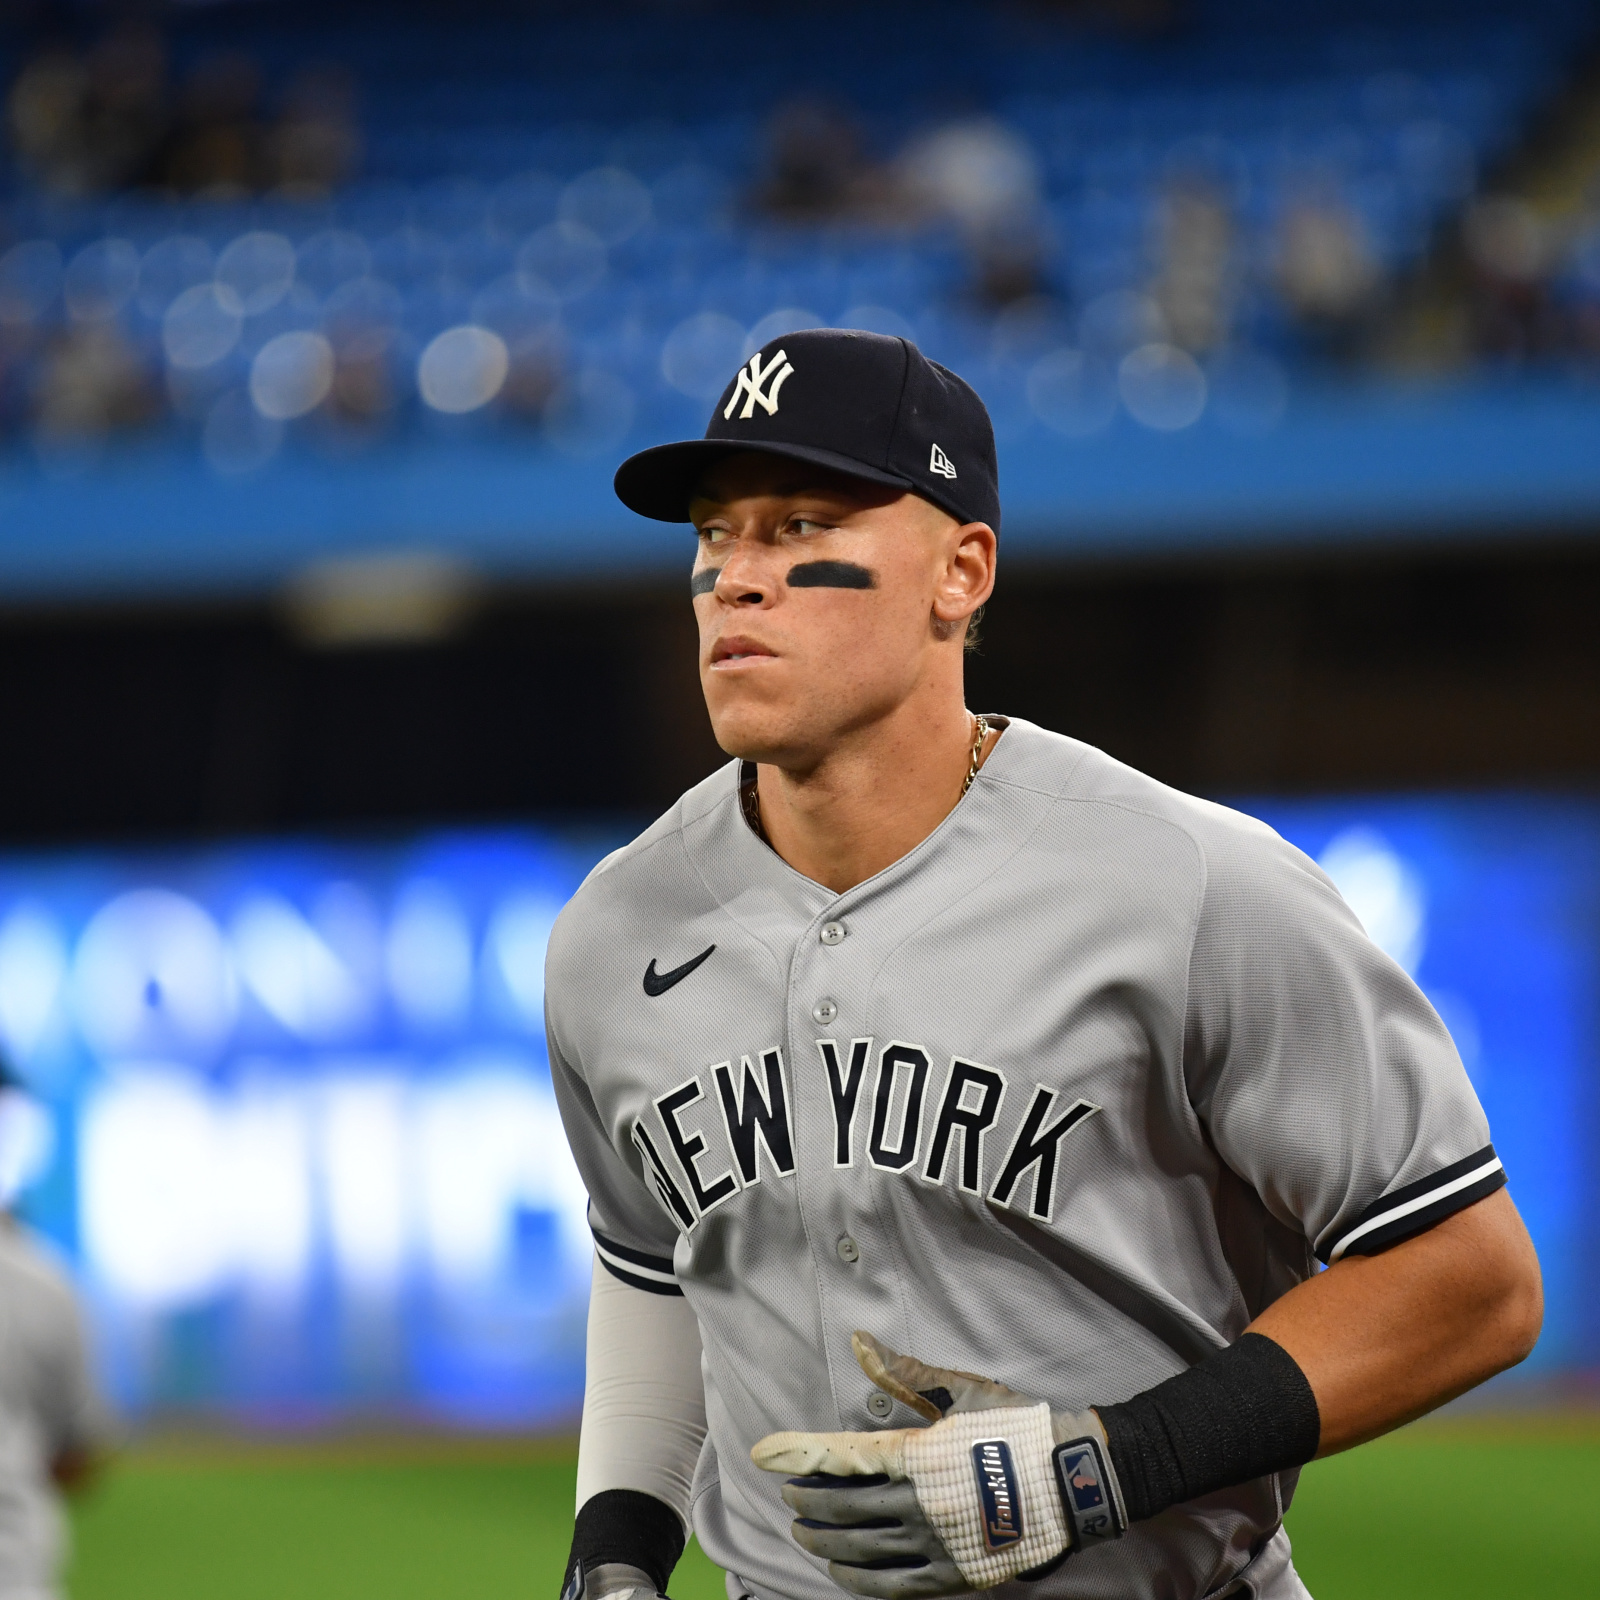 Young Yankees fan has priceless reaction to getting Aaron Judge's